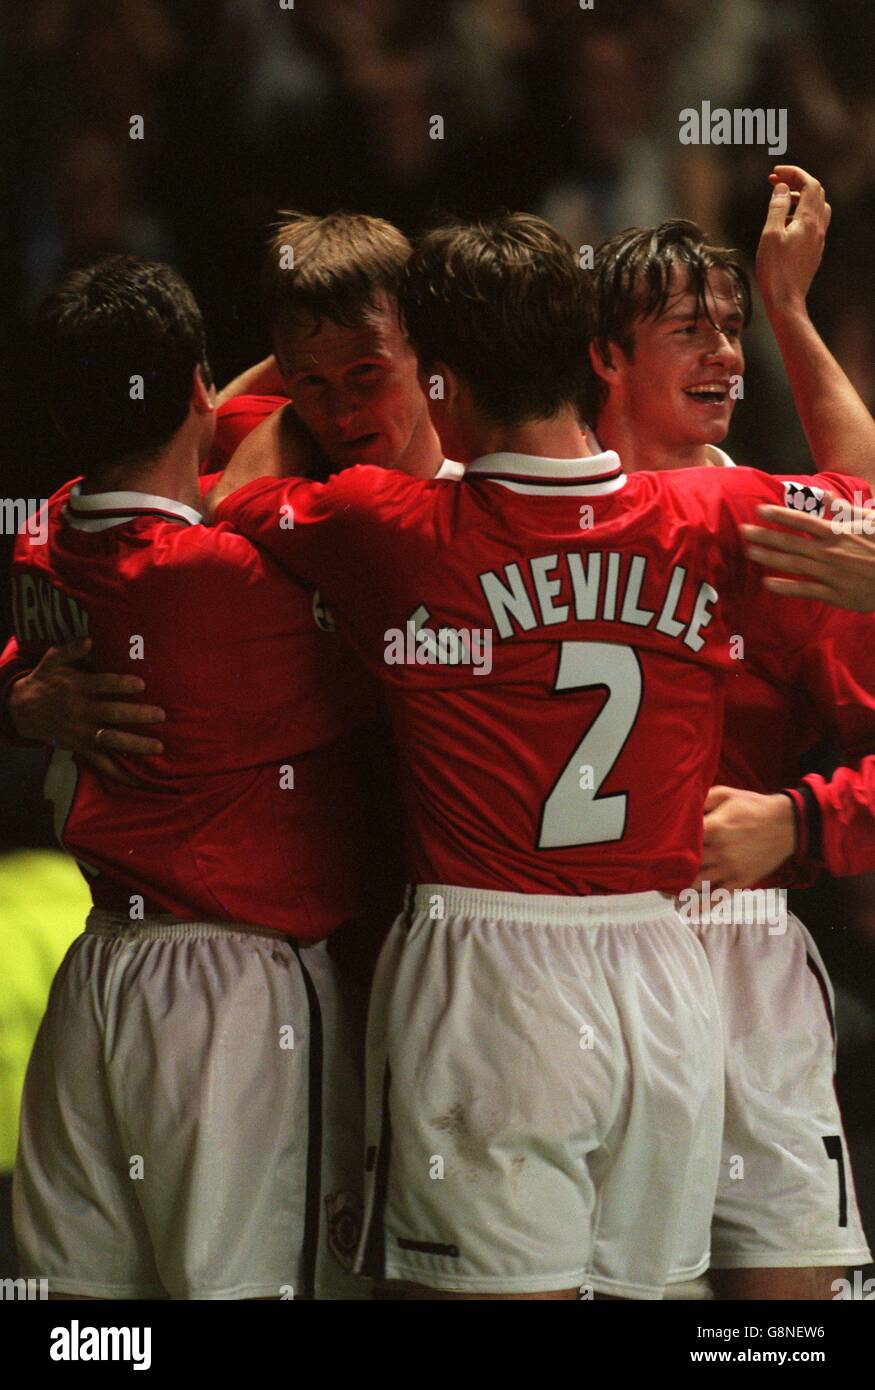 Manchester United goalscorer Teddy Sheringham (second left) is congratulated by team-mates Denis Irwin (left), Gary Neville (second right) and David Beckham (right) Stock Photo